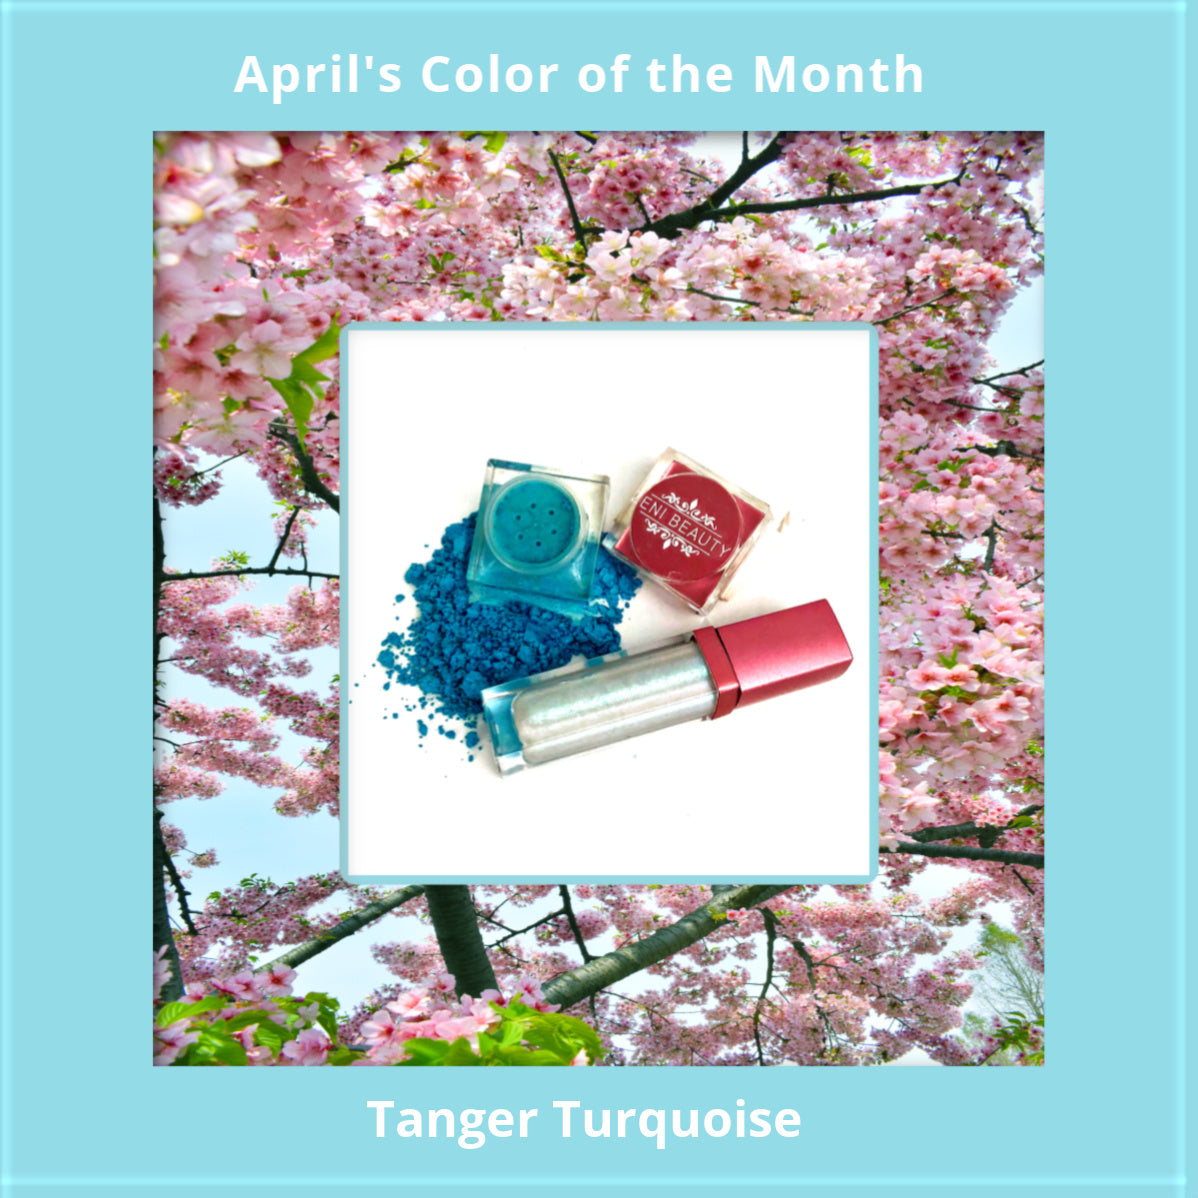 April's Color of the Month is Tanager Turquoise